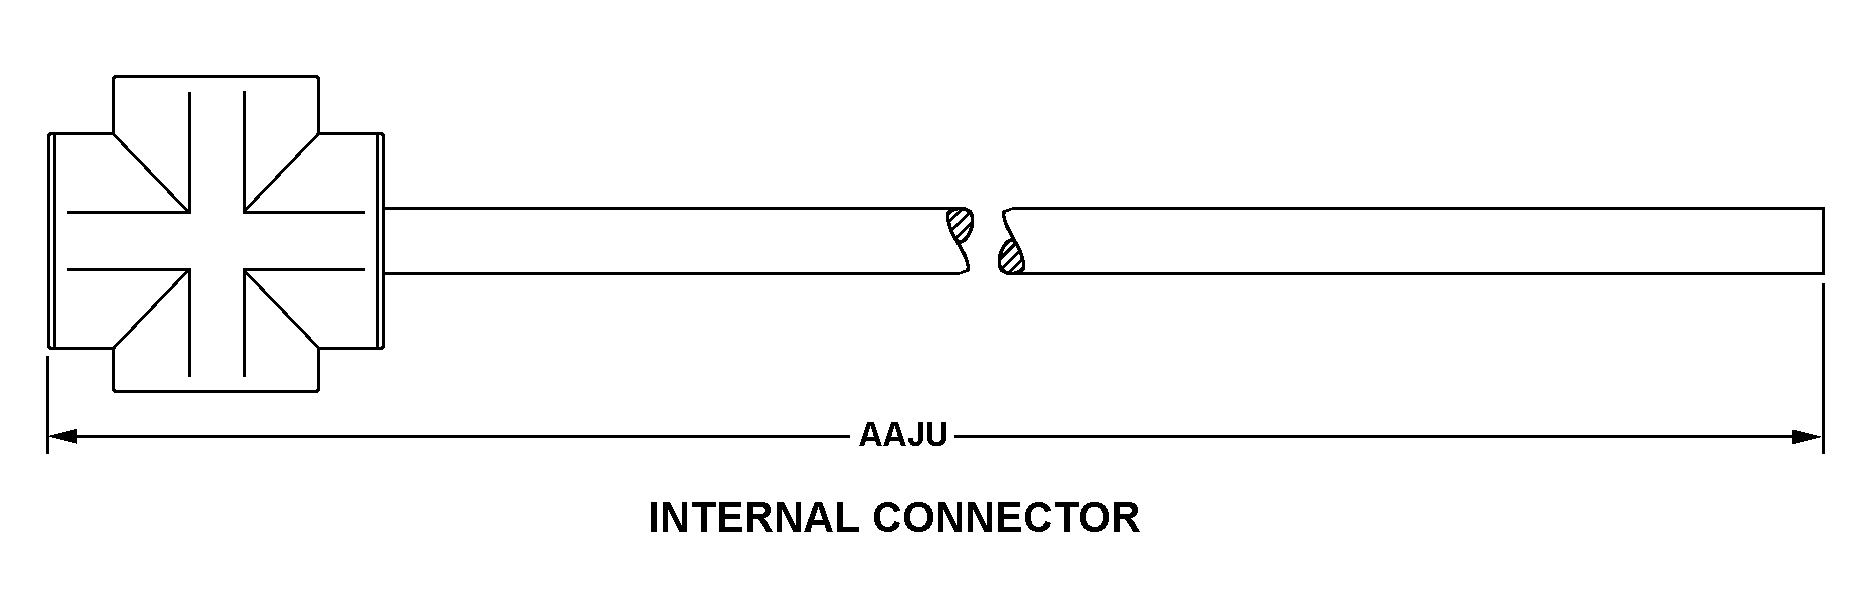 INTERNAL CONNECTOR style nsn 5995-01-432-4400